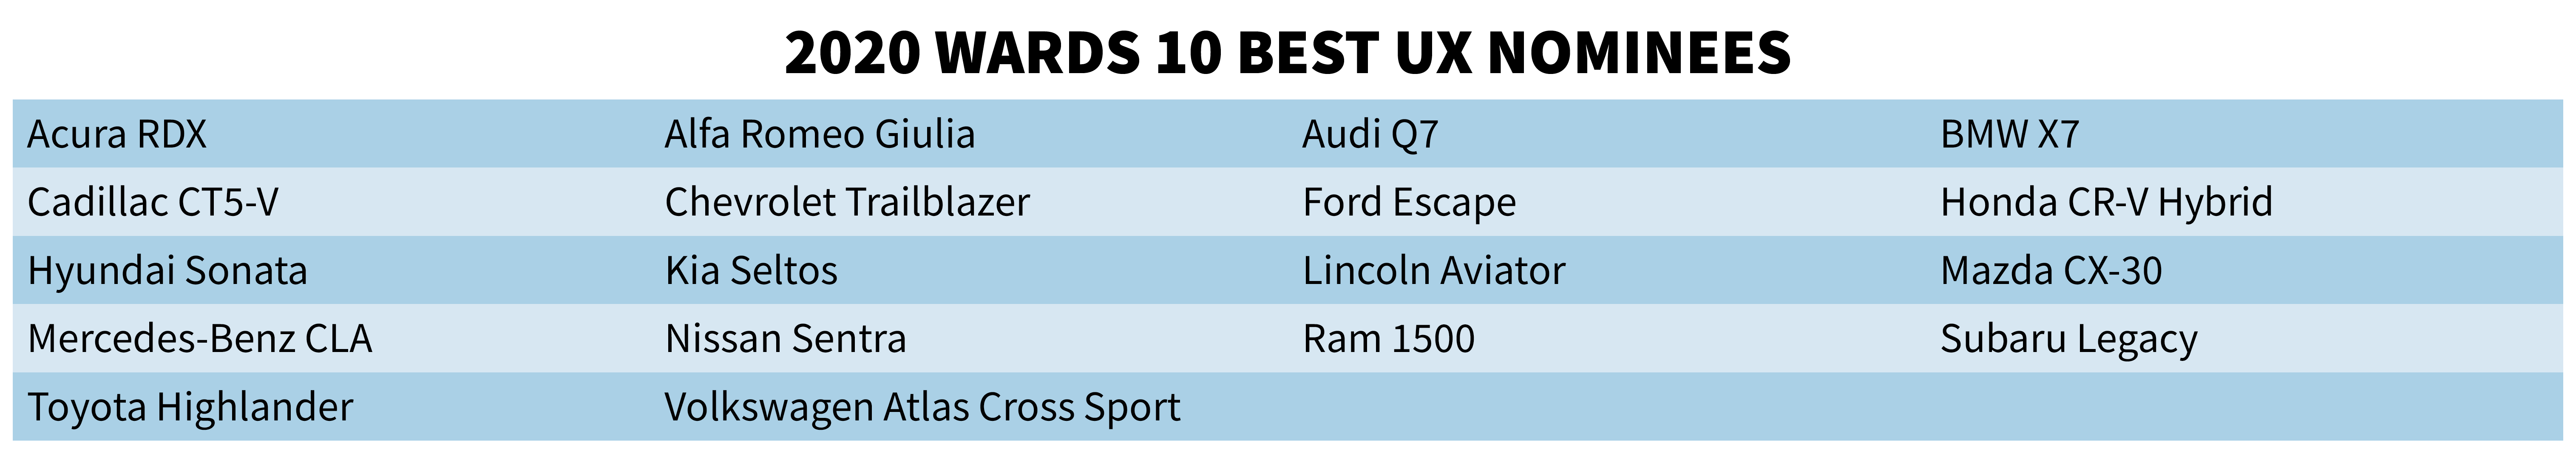 2020-10UX-nominees.png